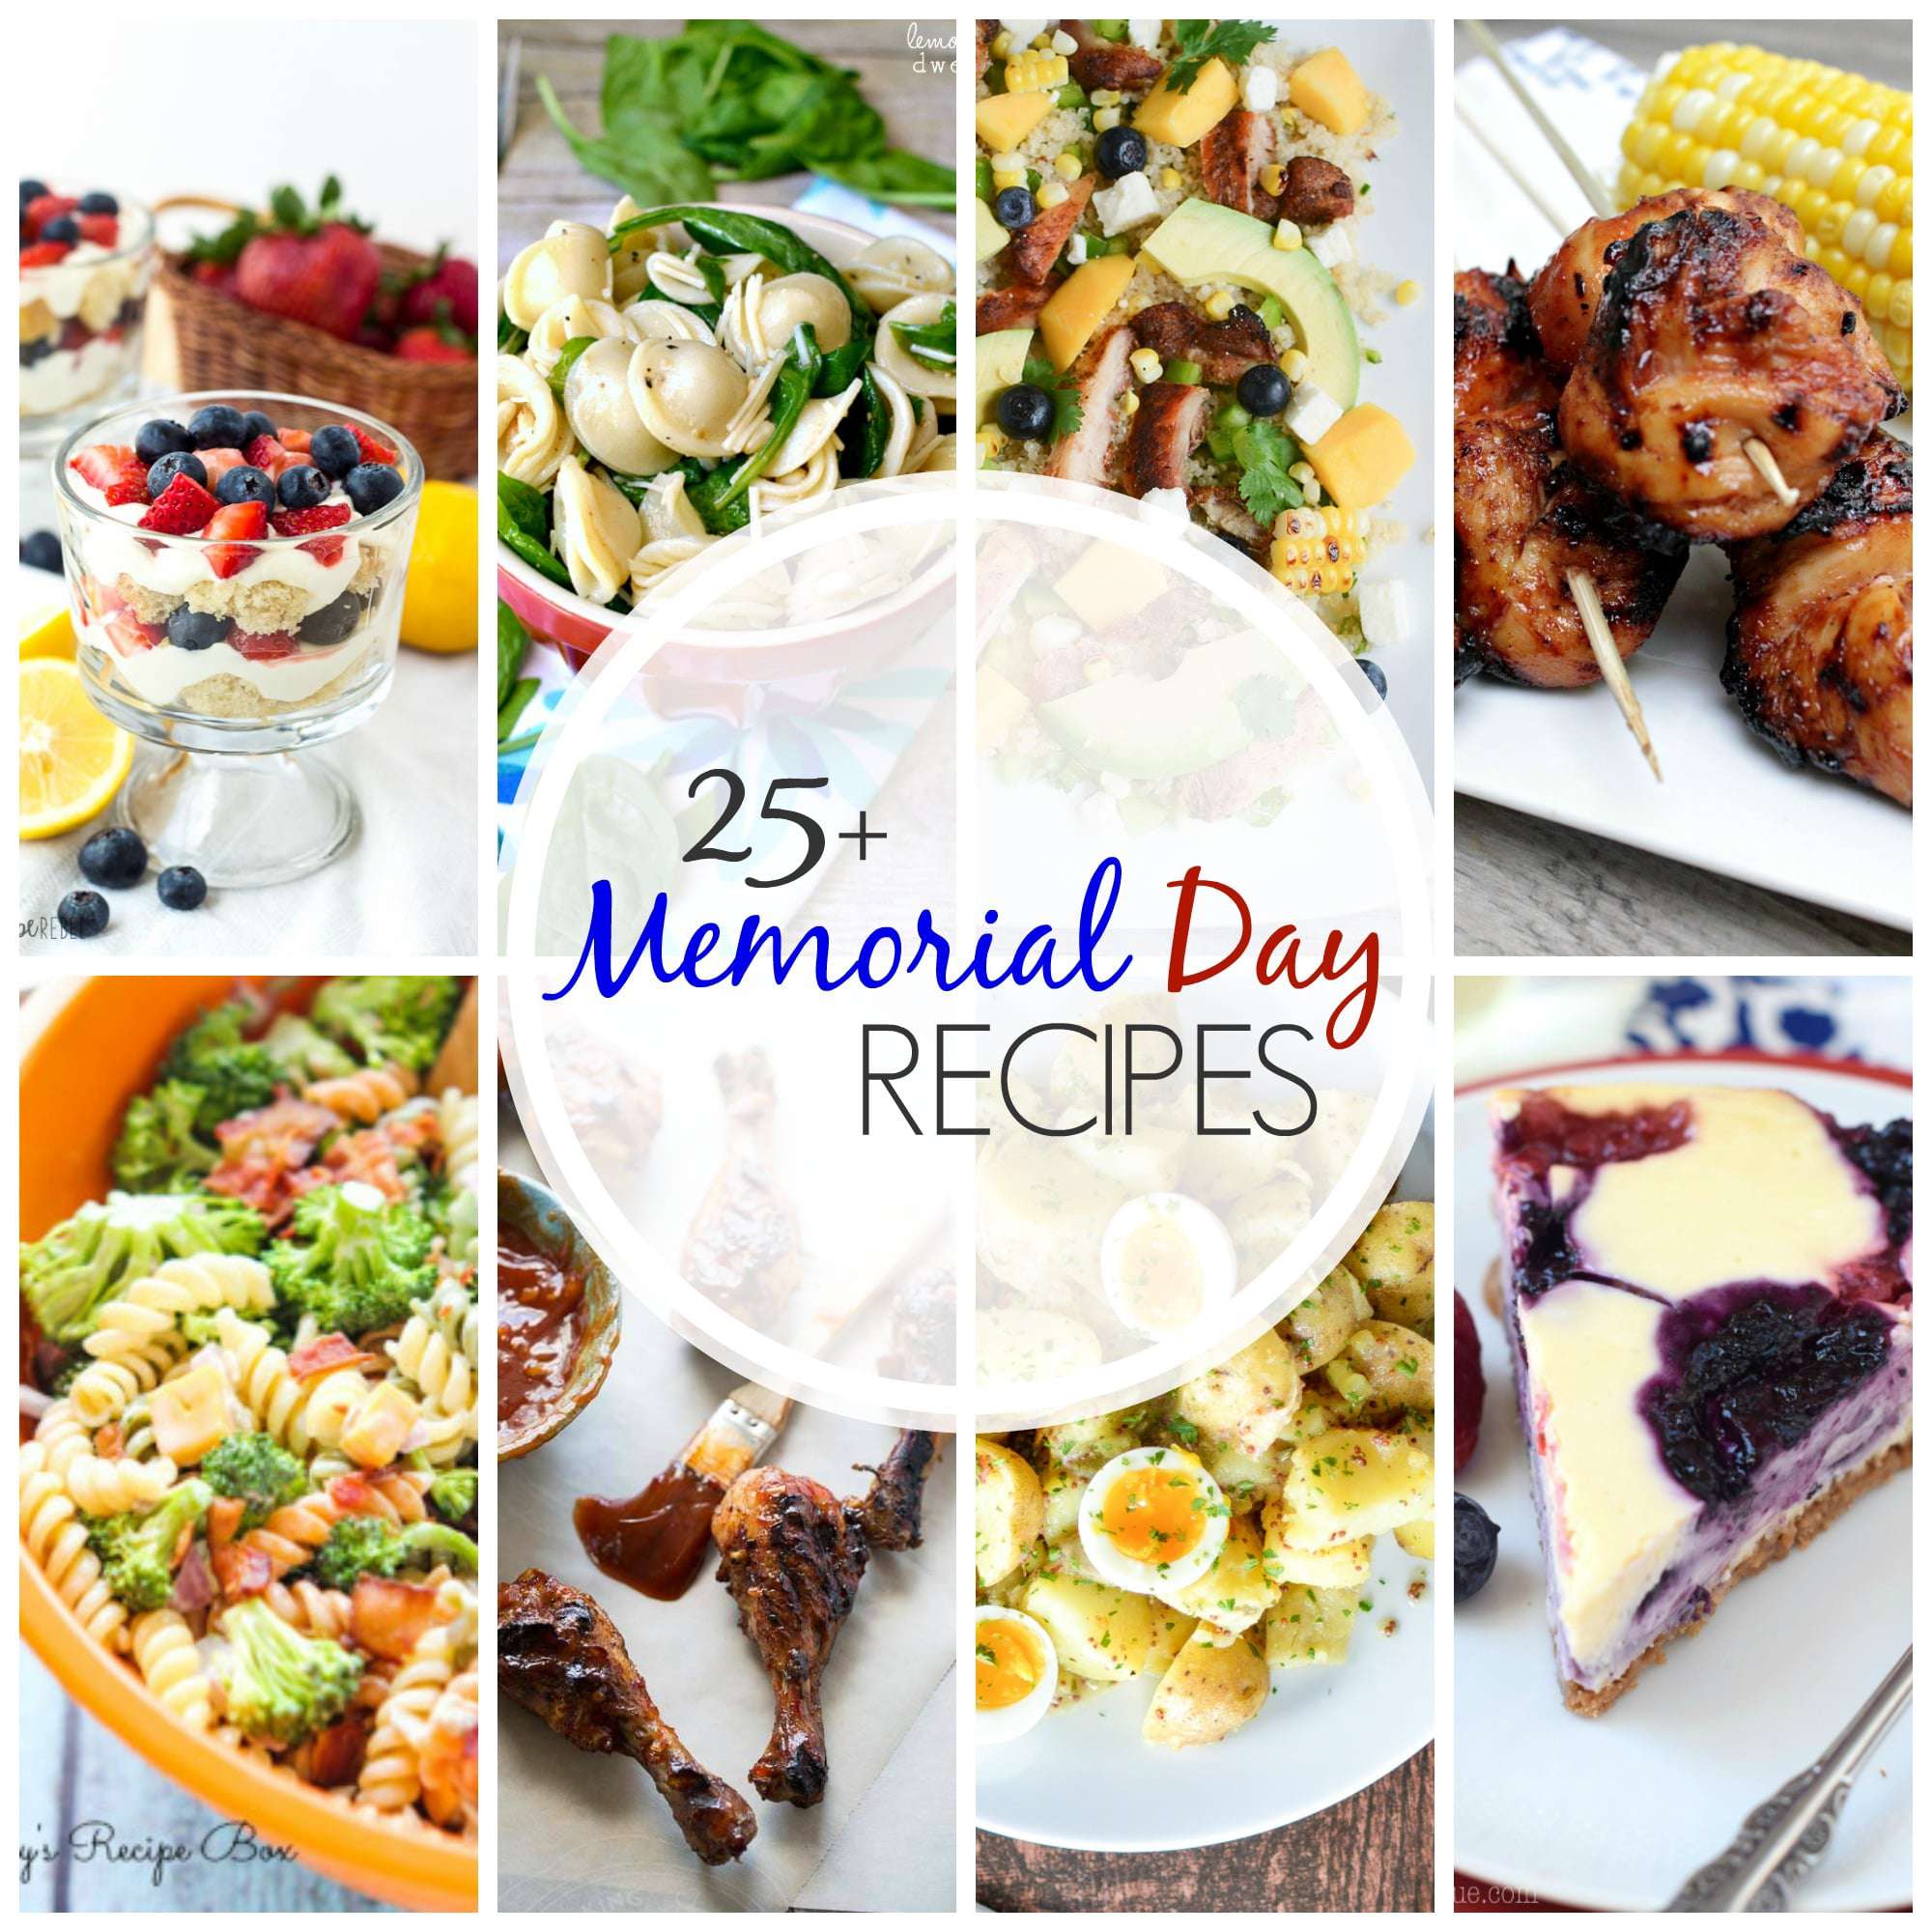 25+ memorial day recipes to kick off the summer